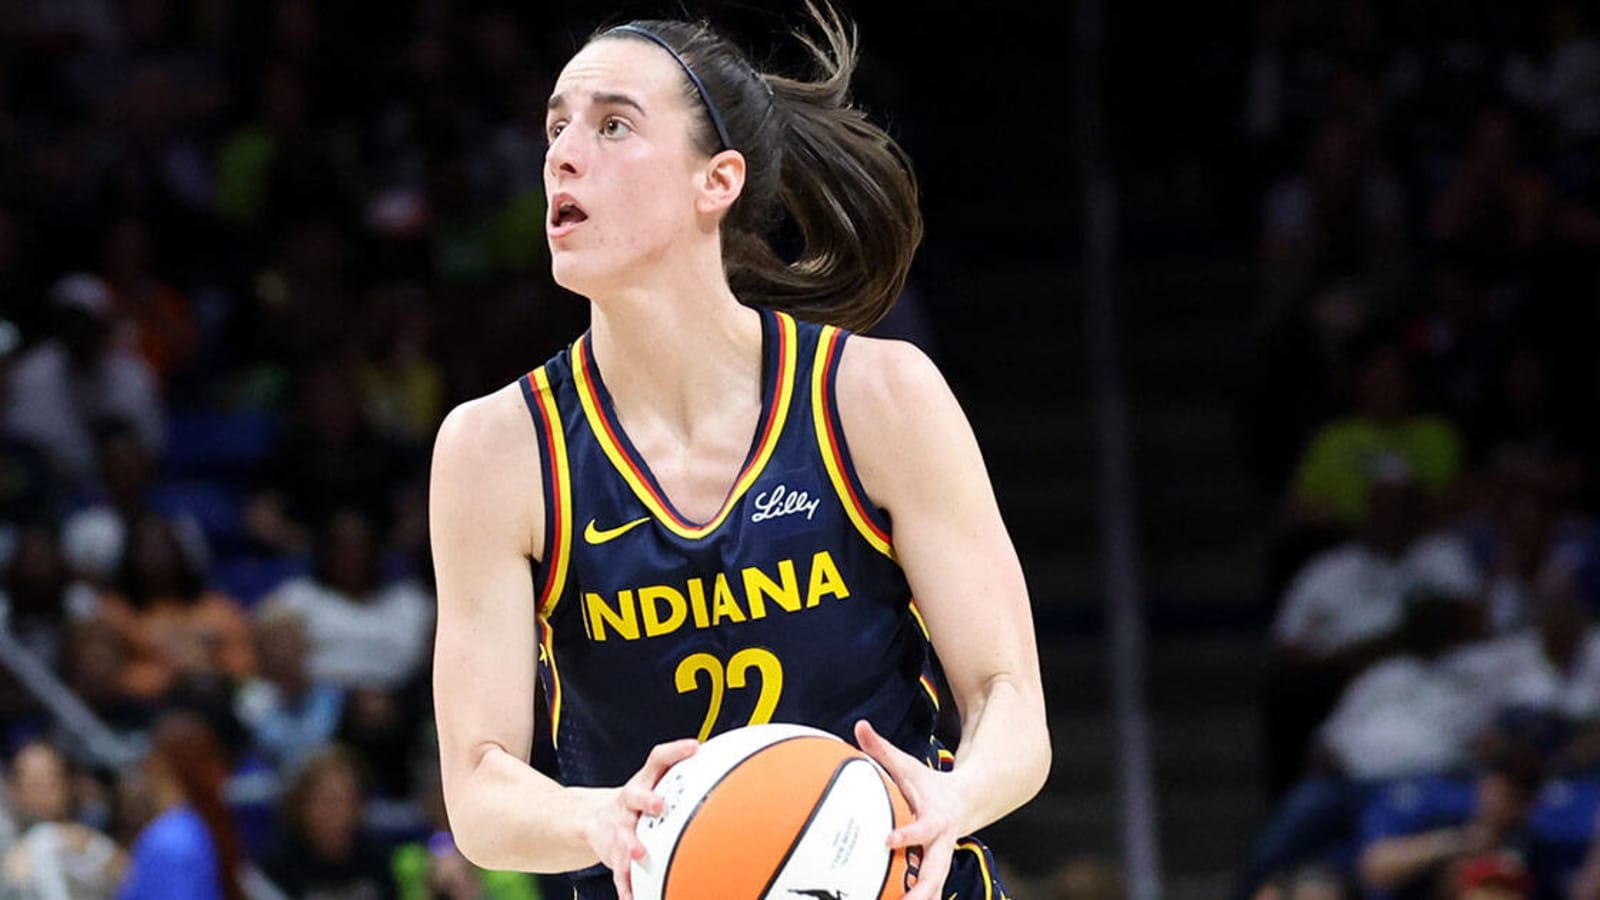 Caitlin Clark rocks all-black outfit with blue accents ahead of WNBA debut with Indiana Fever